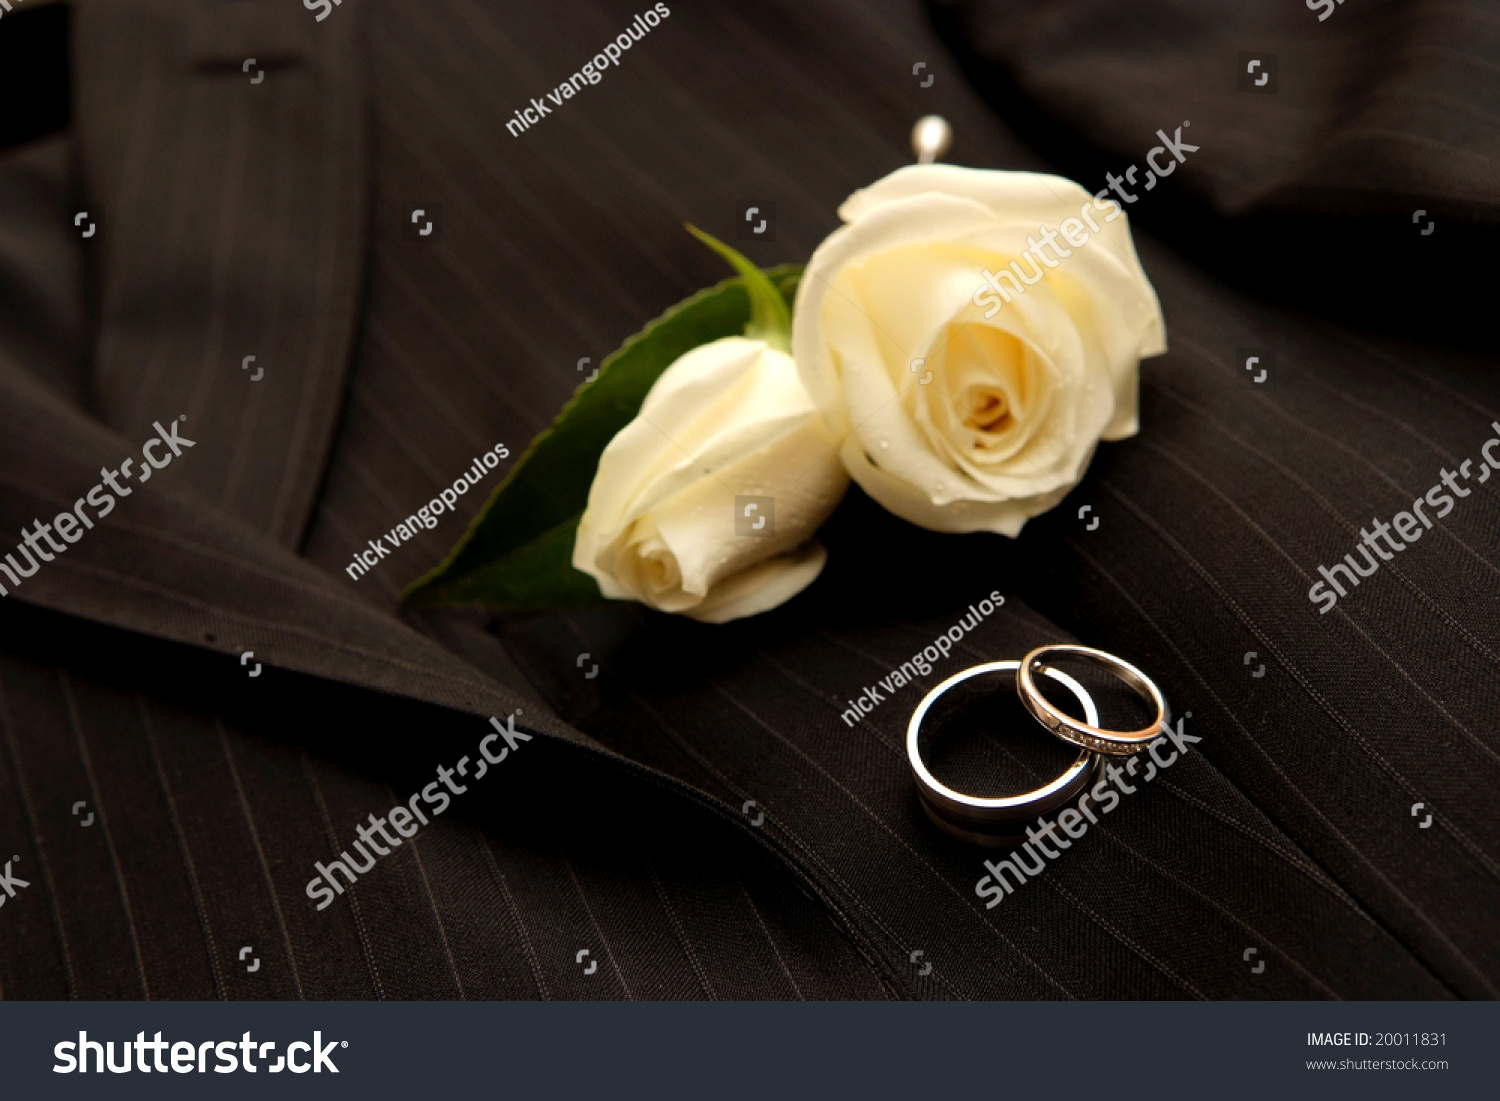 Wedding rings & boutonniere #20011831